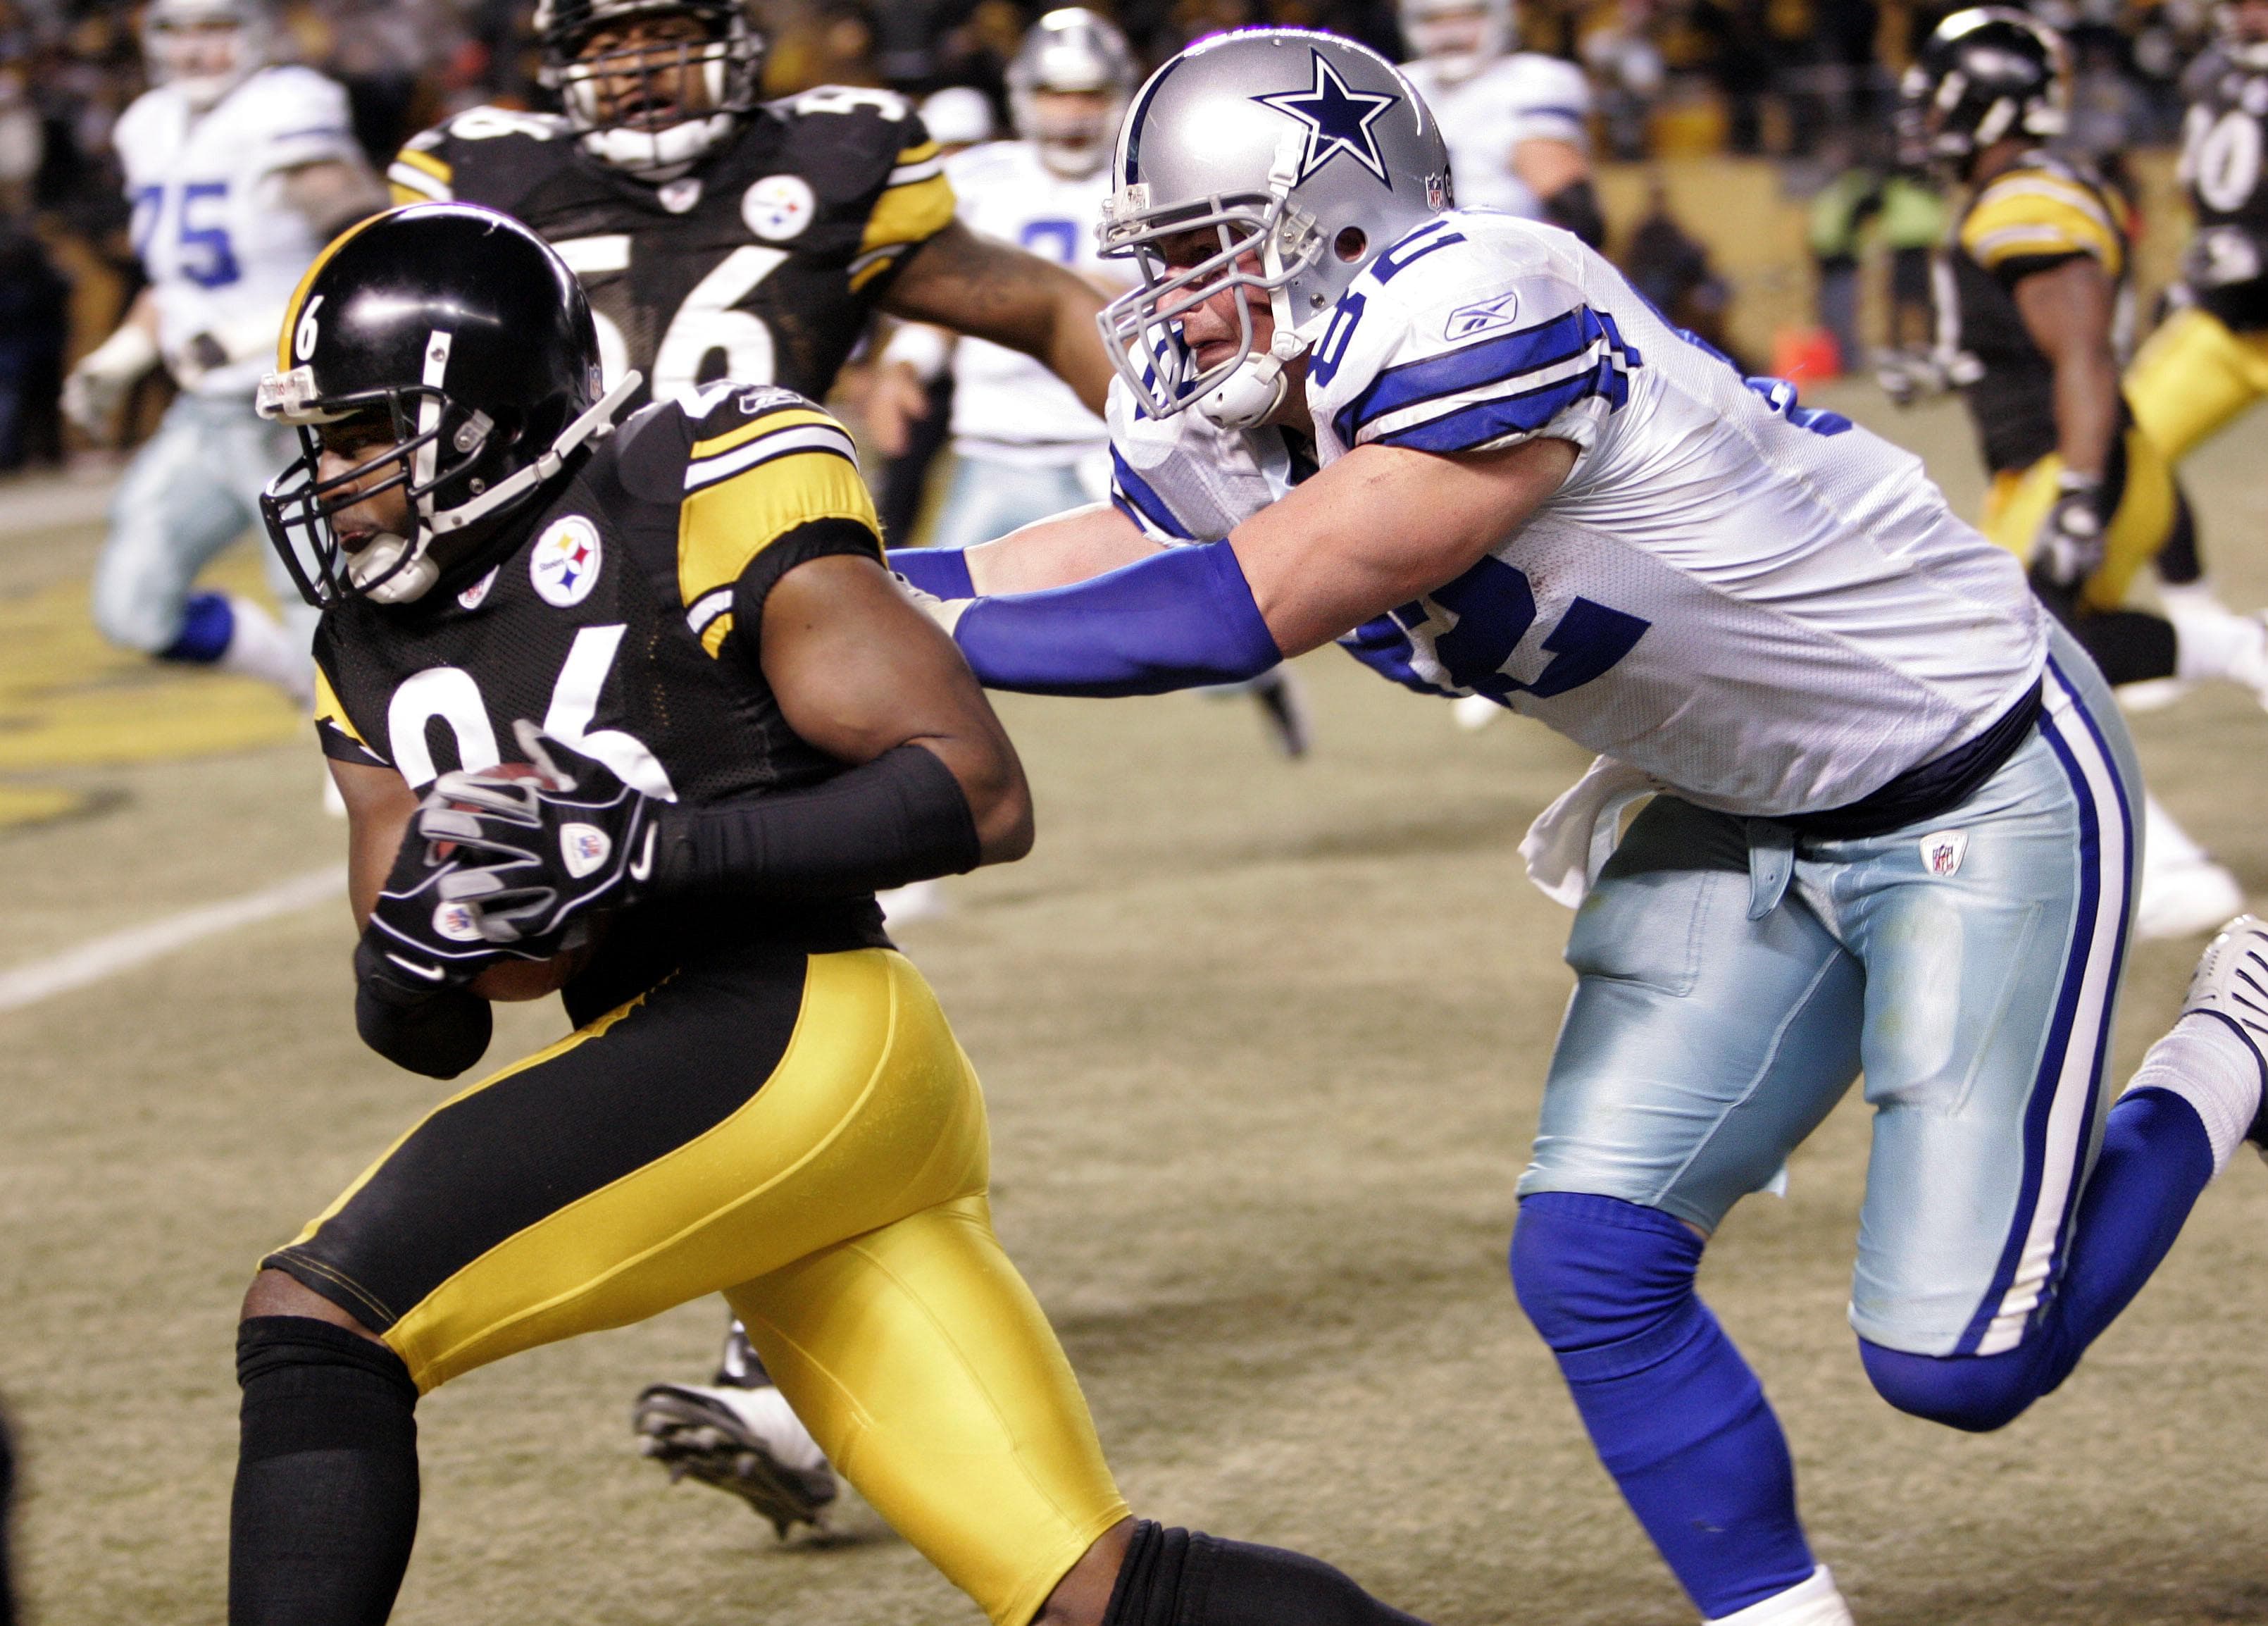 Cowboys & Steelers Lose Luster, Fans Stay Loyal